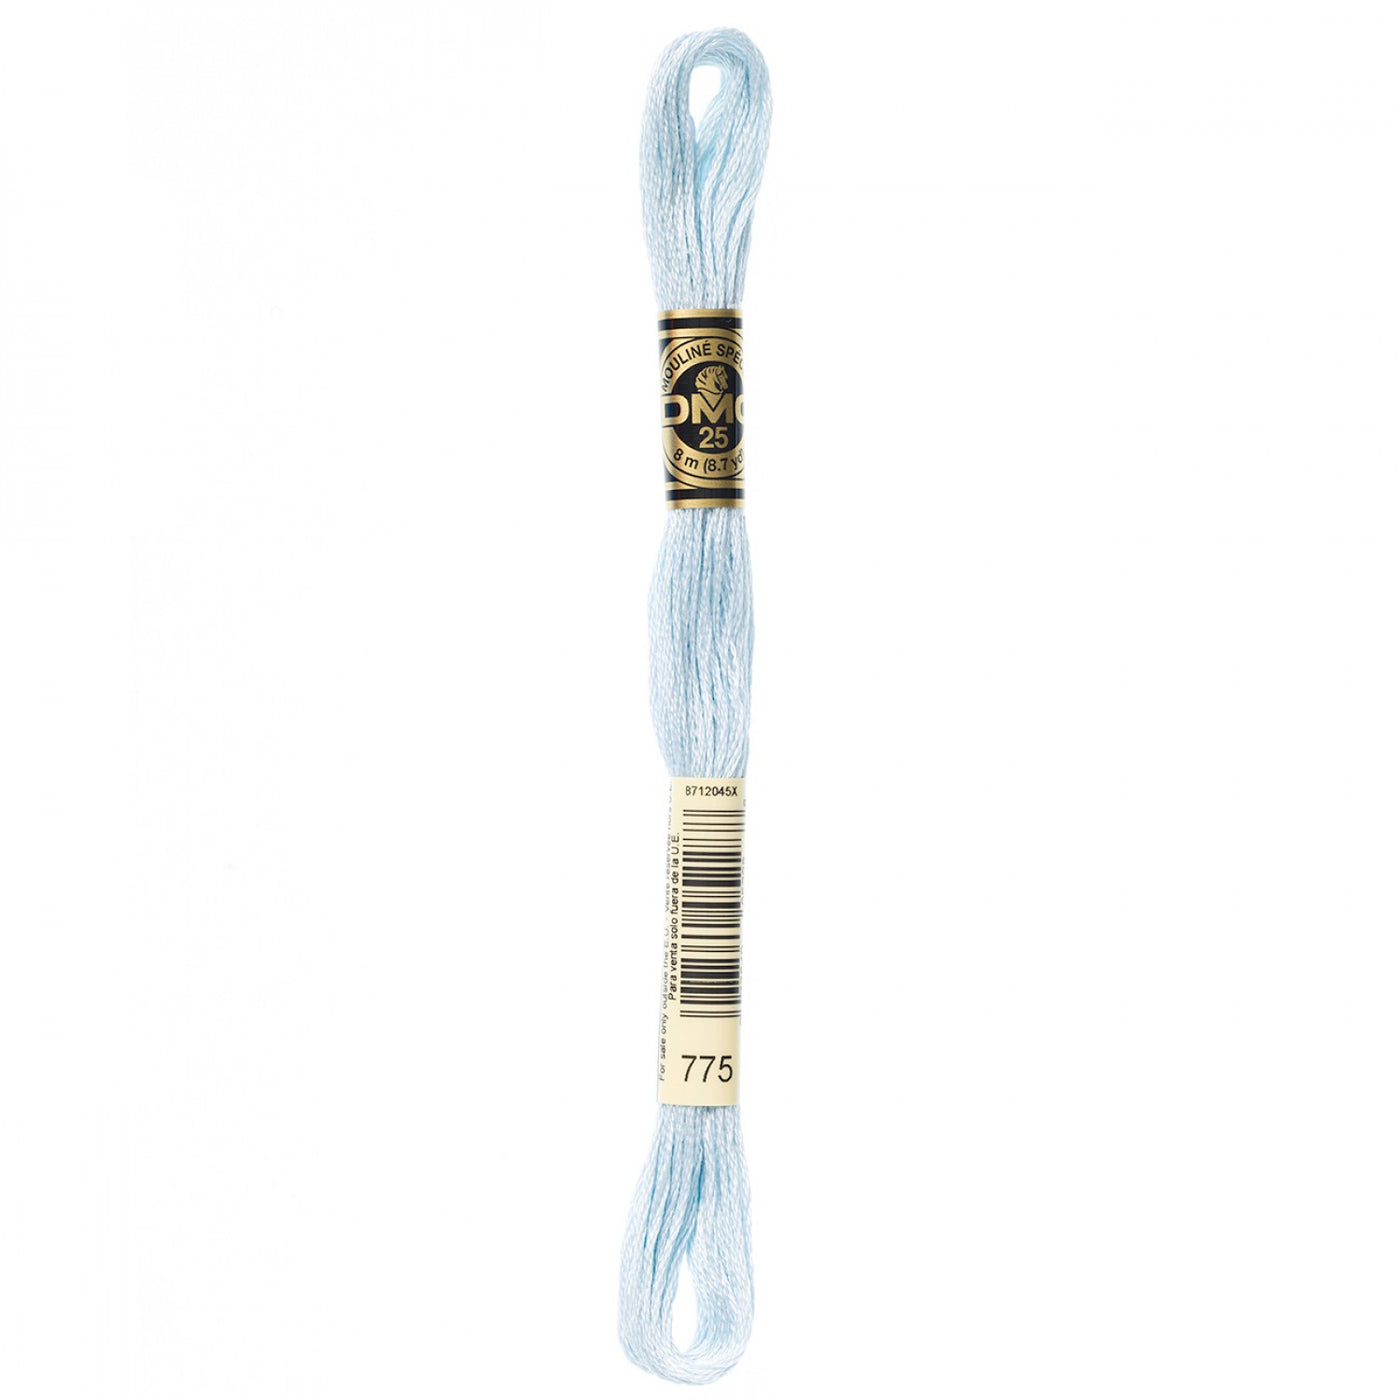 6-Strand Embroidery Floss 775 Very Lt Baby Blue (5453179682981)